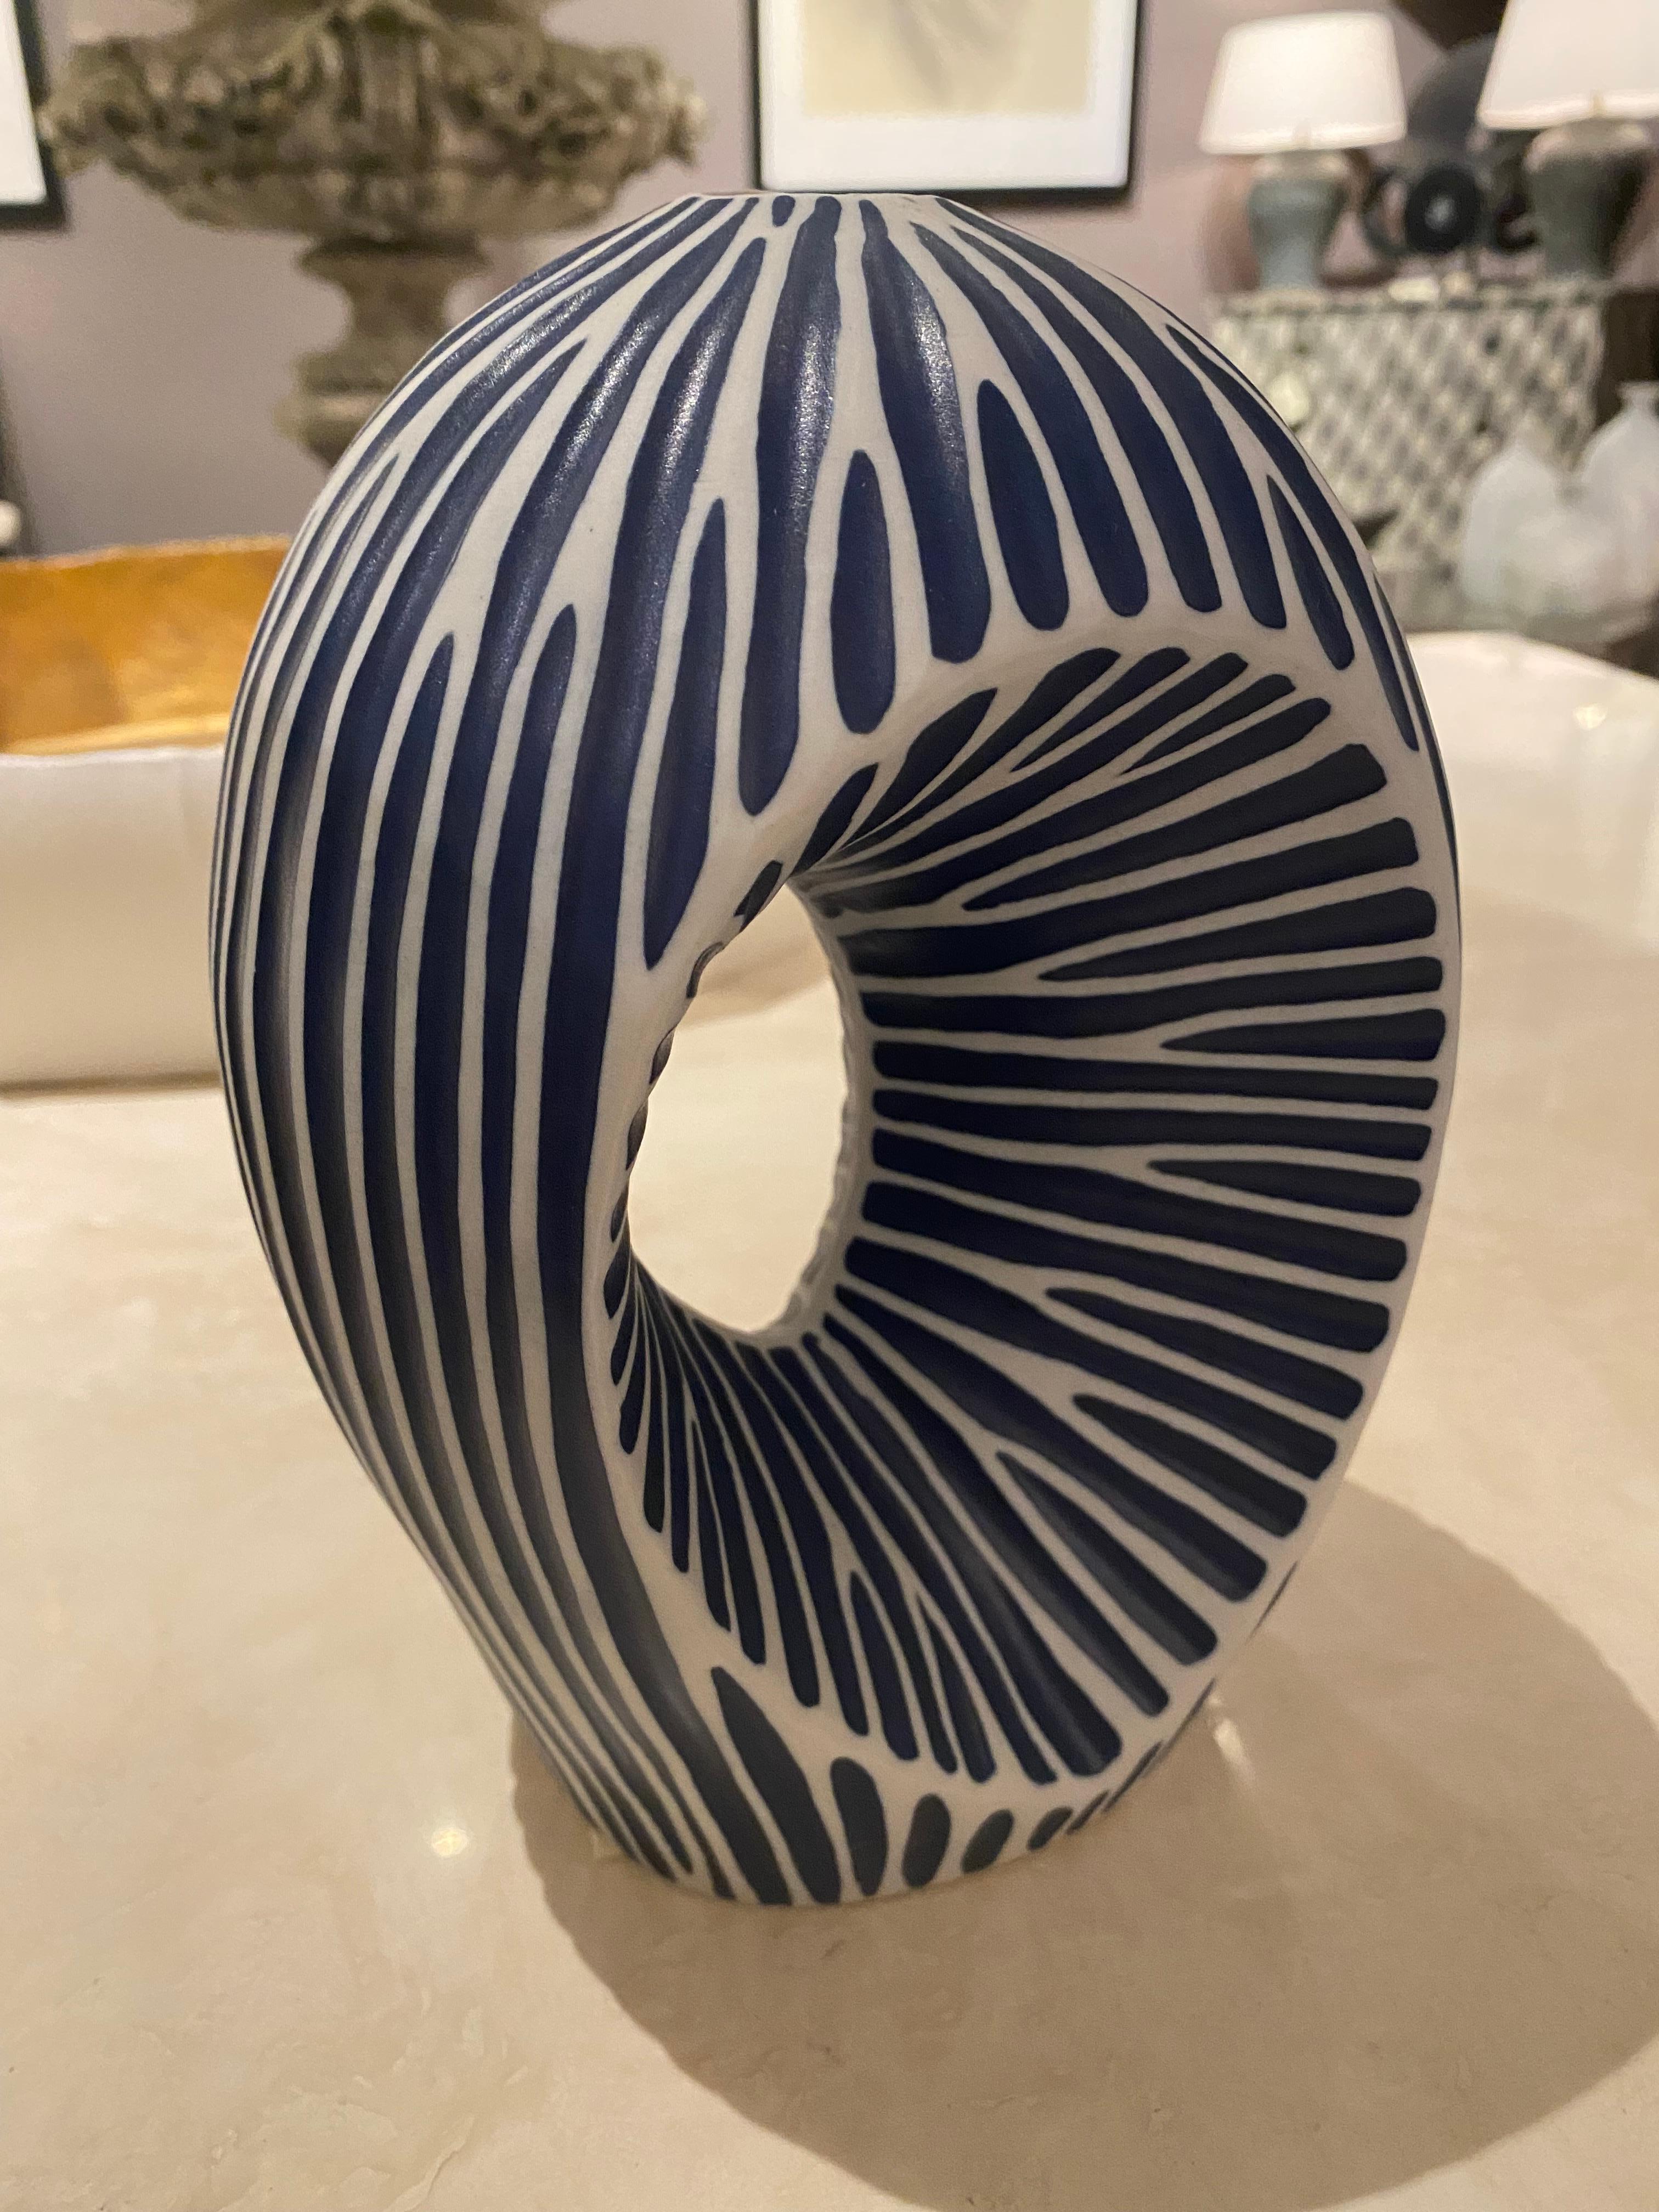 Contemporary Thailand dark blue with thin white stripe ceramic vase.
Indented hole design in the middle of the vase.
Can hold water.
Part of a very large collection of blue and white vases in various shapes and sizes.